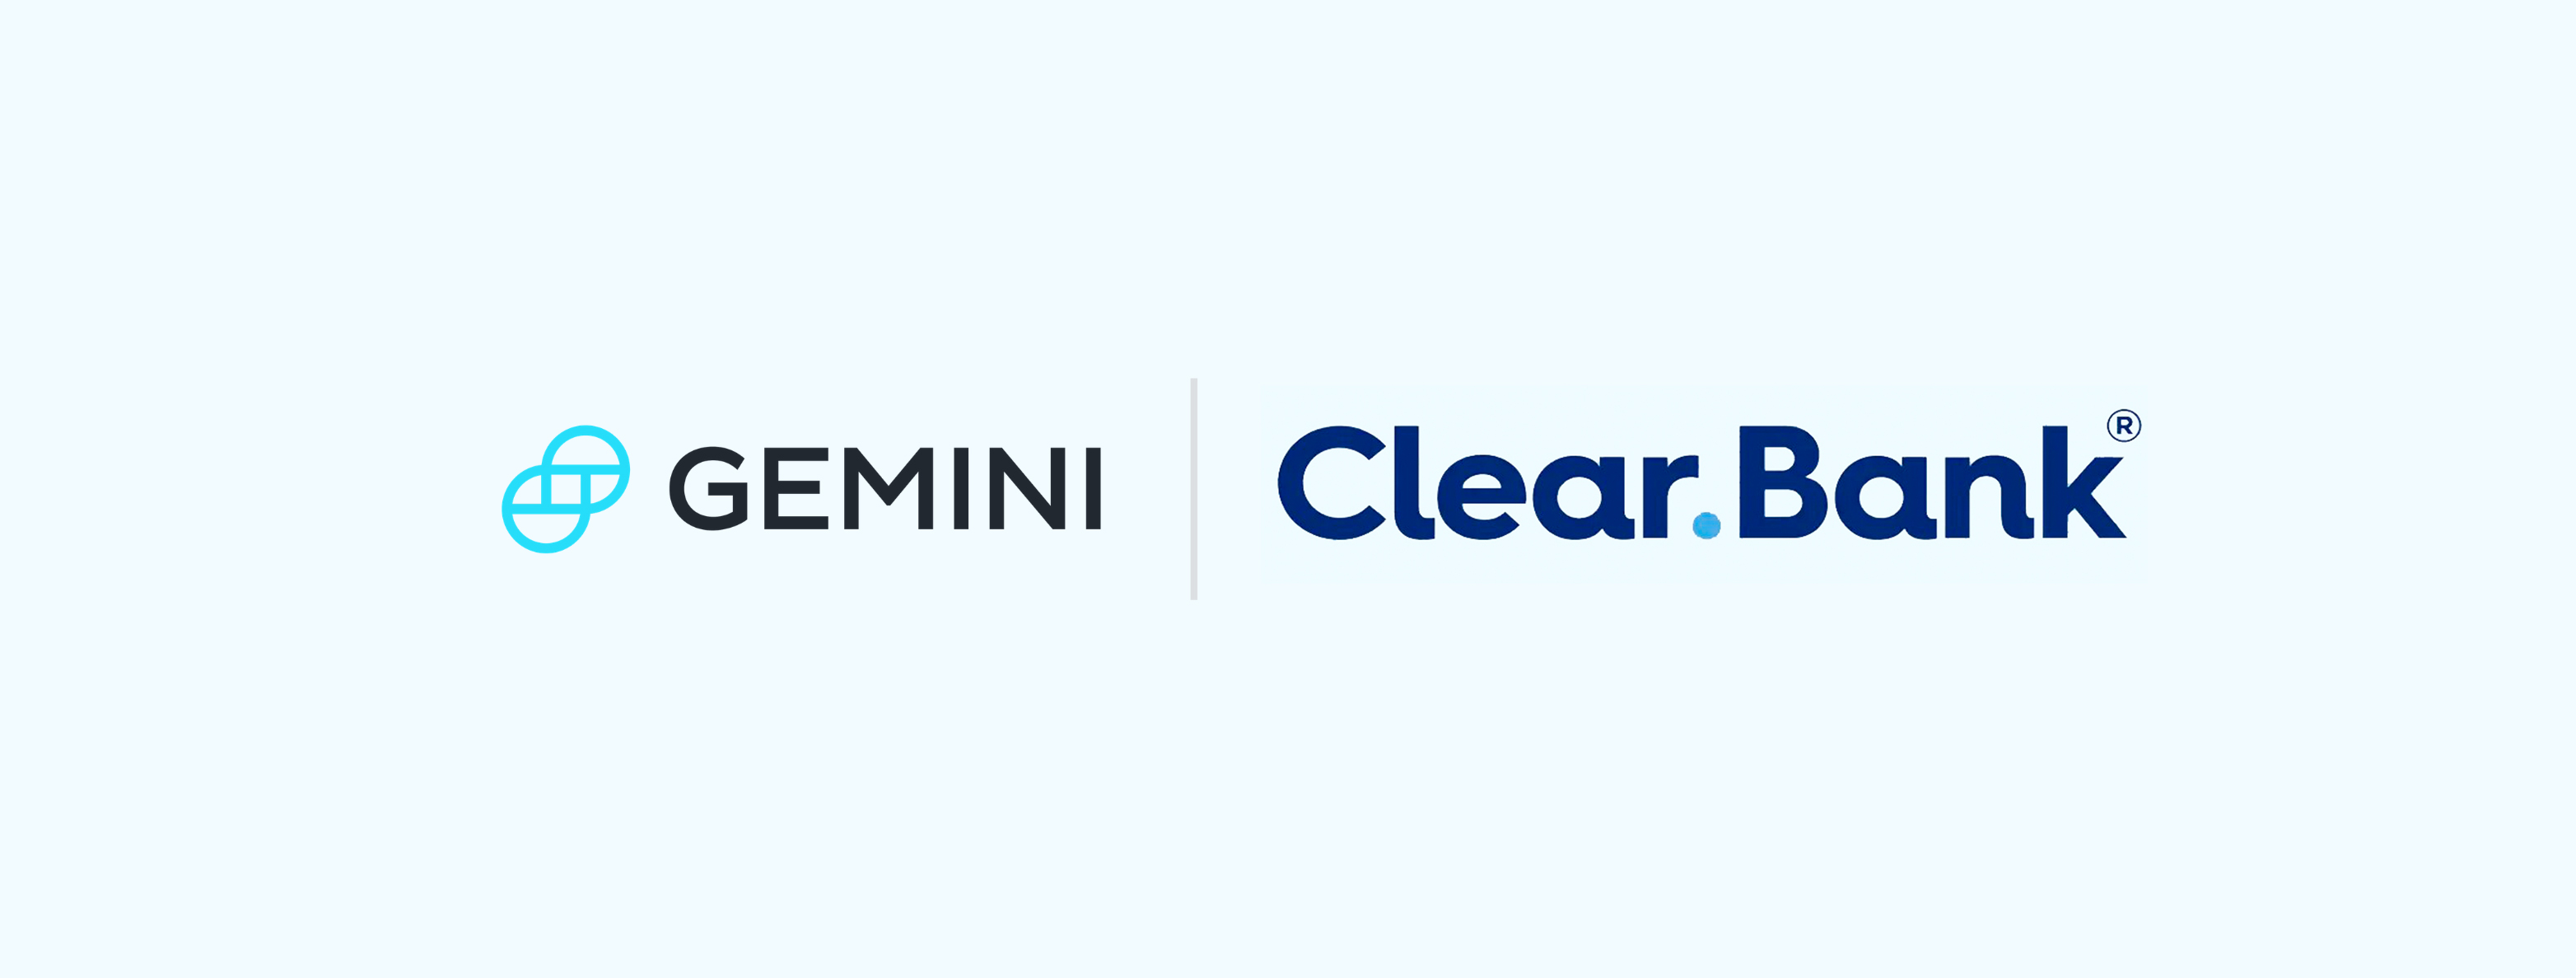 Gemini Selects ClearBank as UK Banking Services Provider